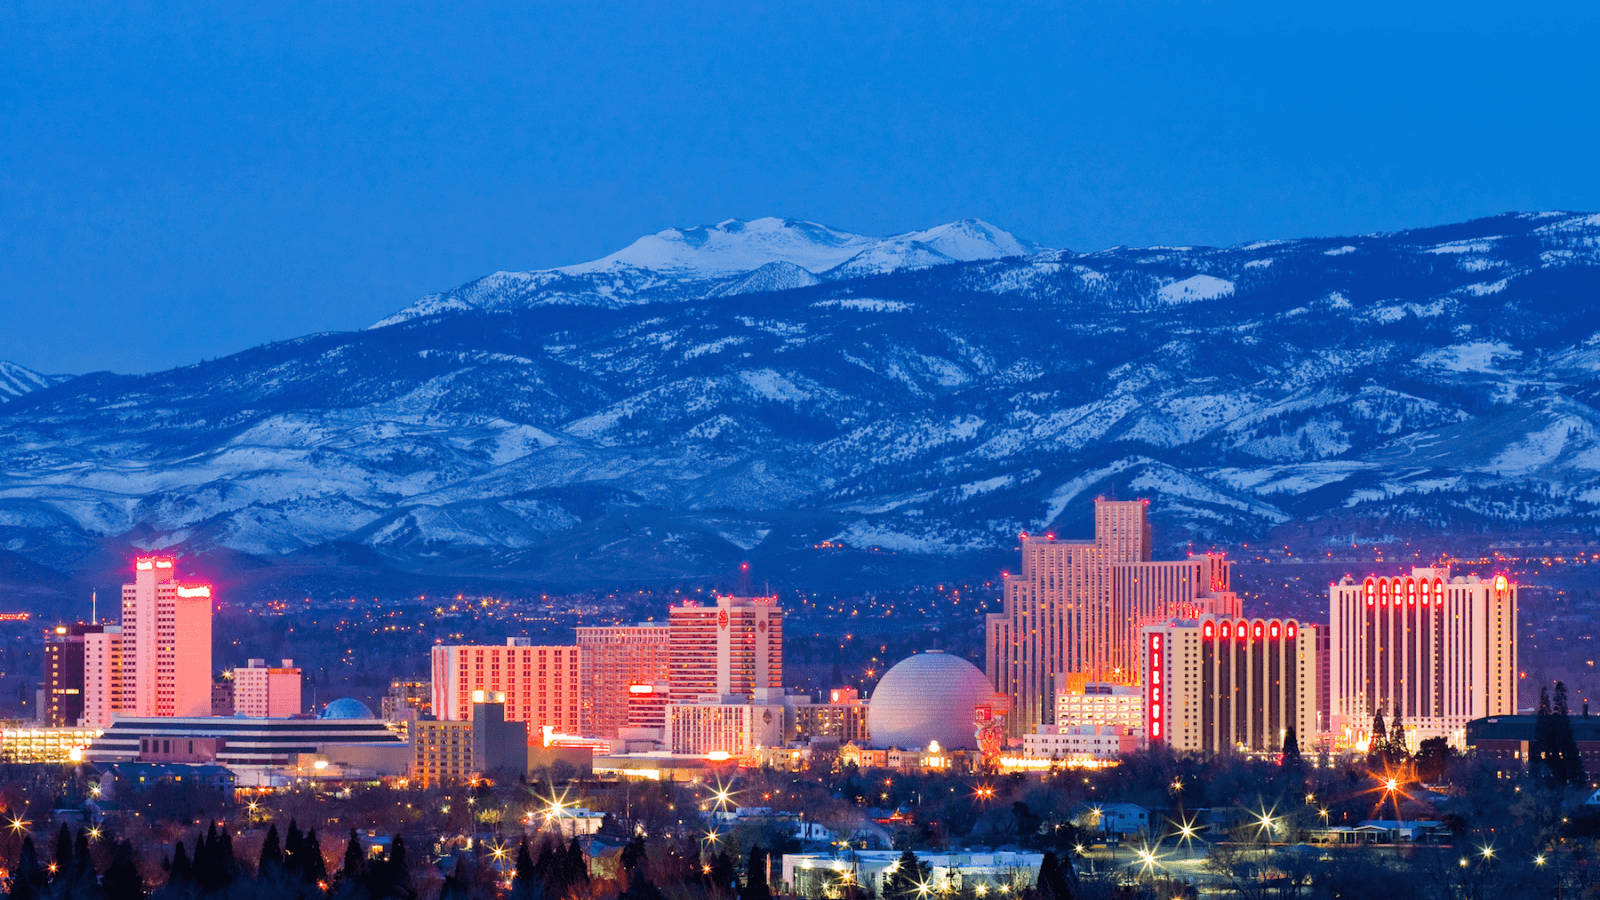 A scenic skyline of Reno, Nevada, with the Sierra Nevada Range in the backdrop Wallpaper